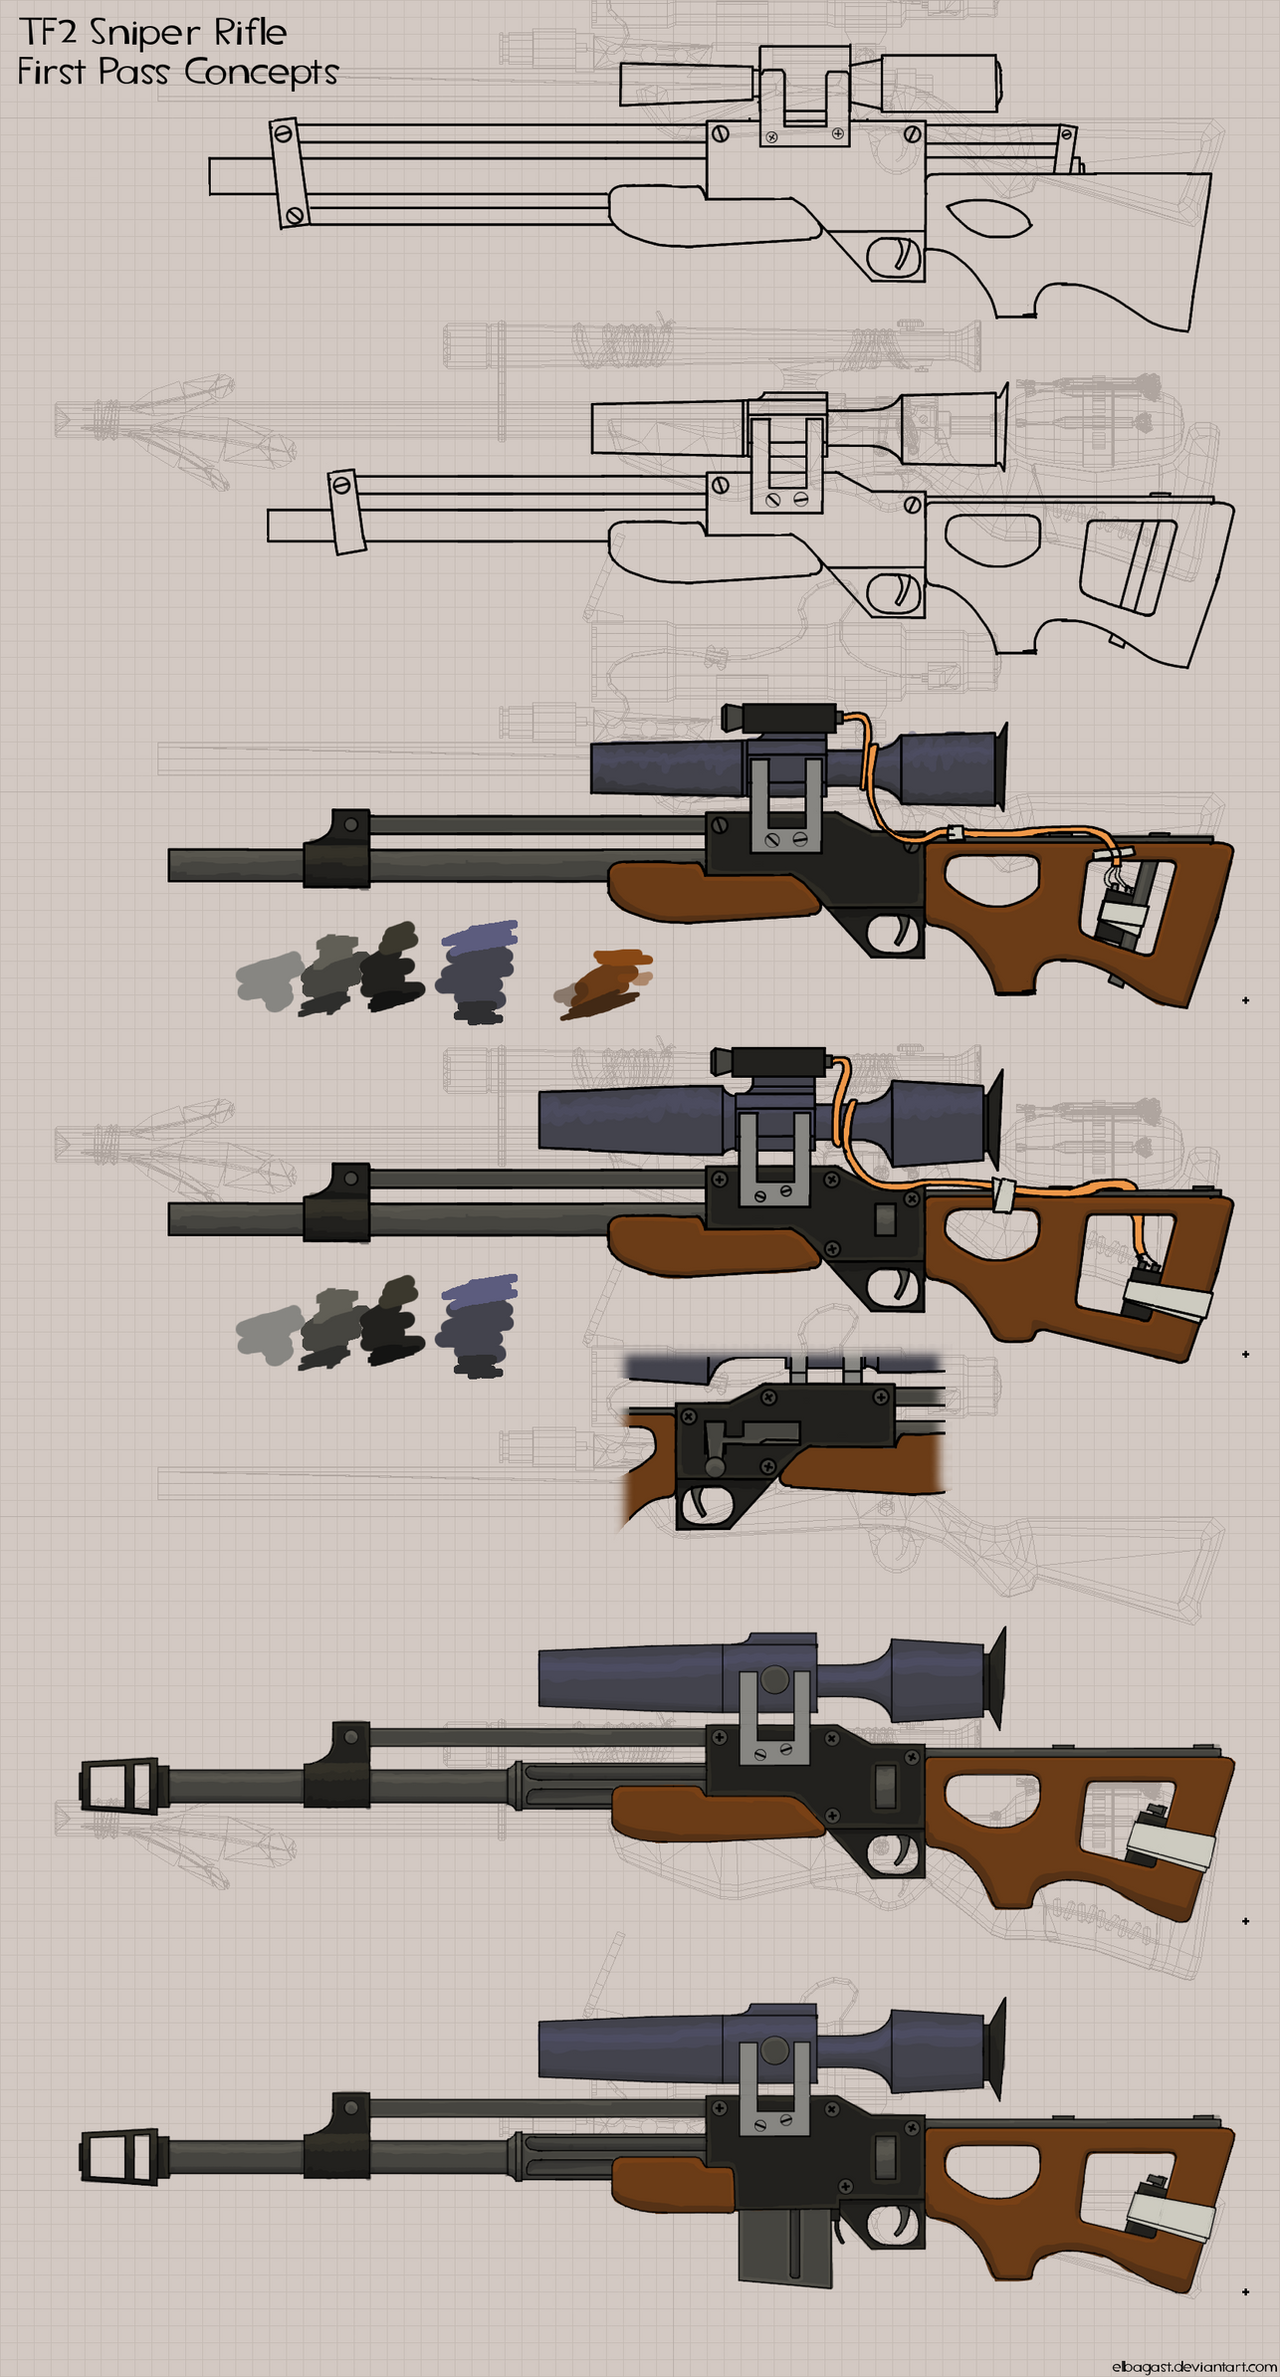 tf2_sniper_rifle_concepts_by_elbagast-d34gxeg.png